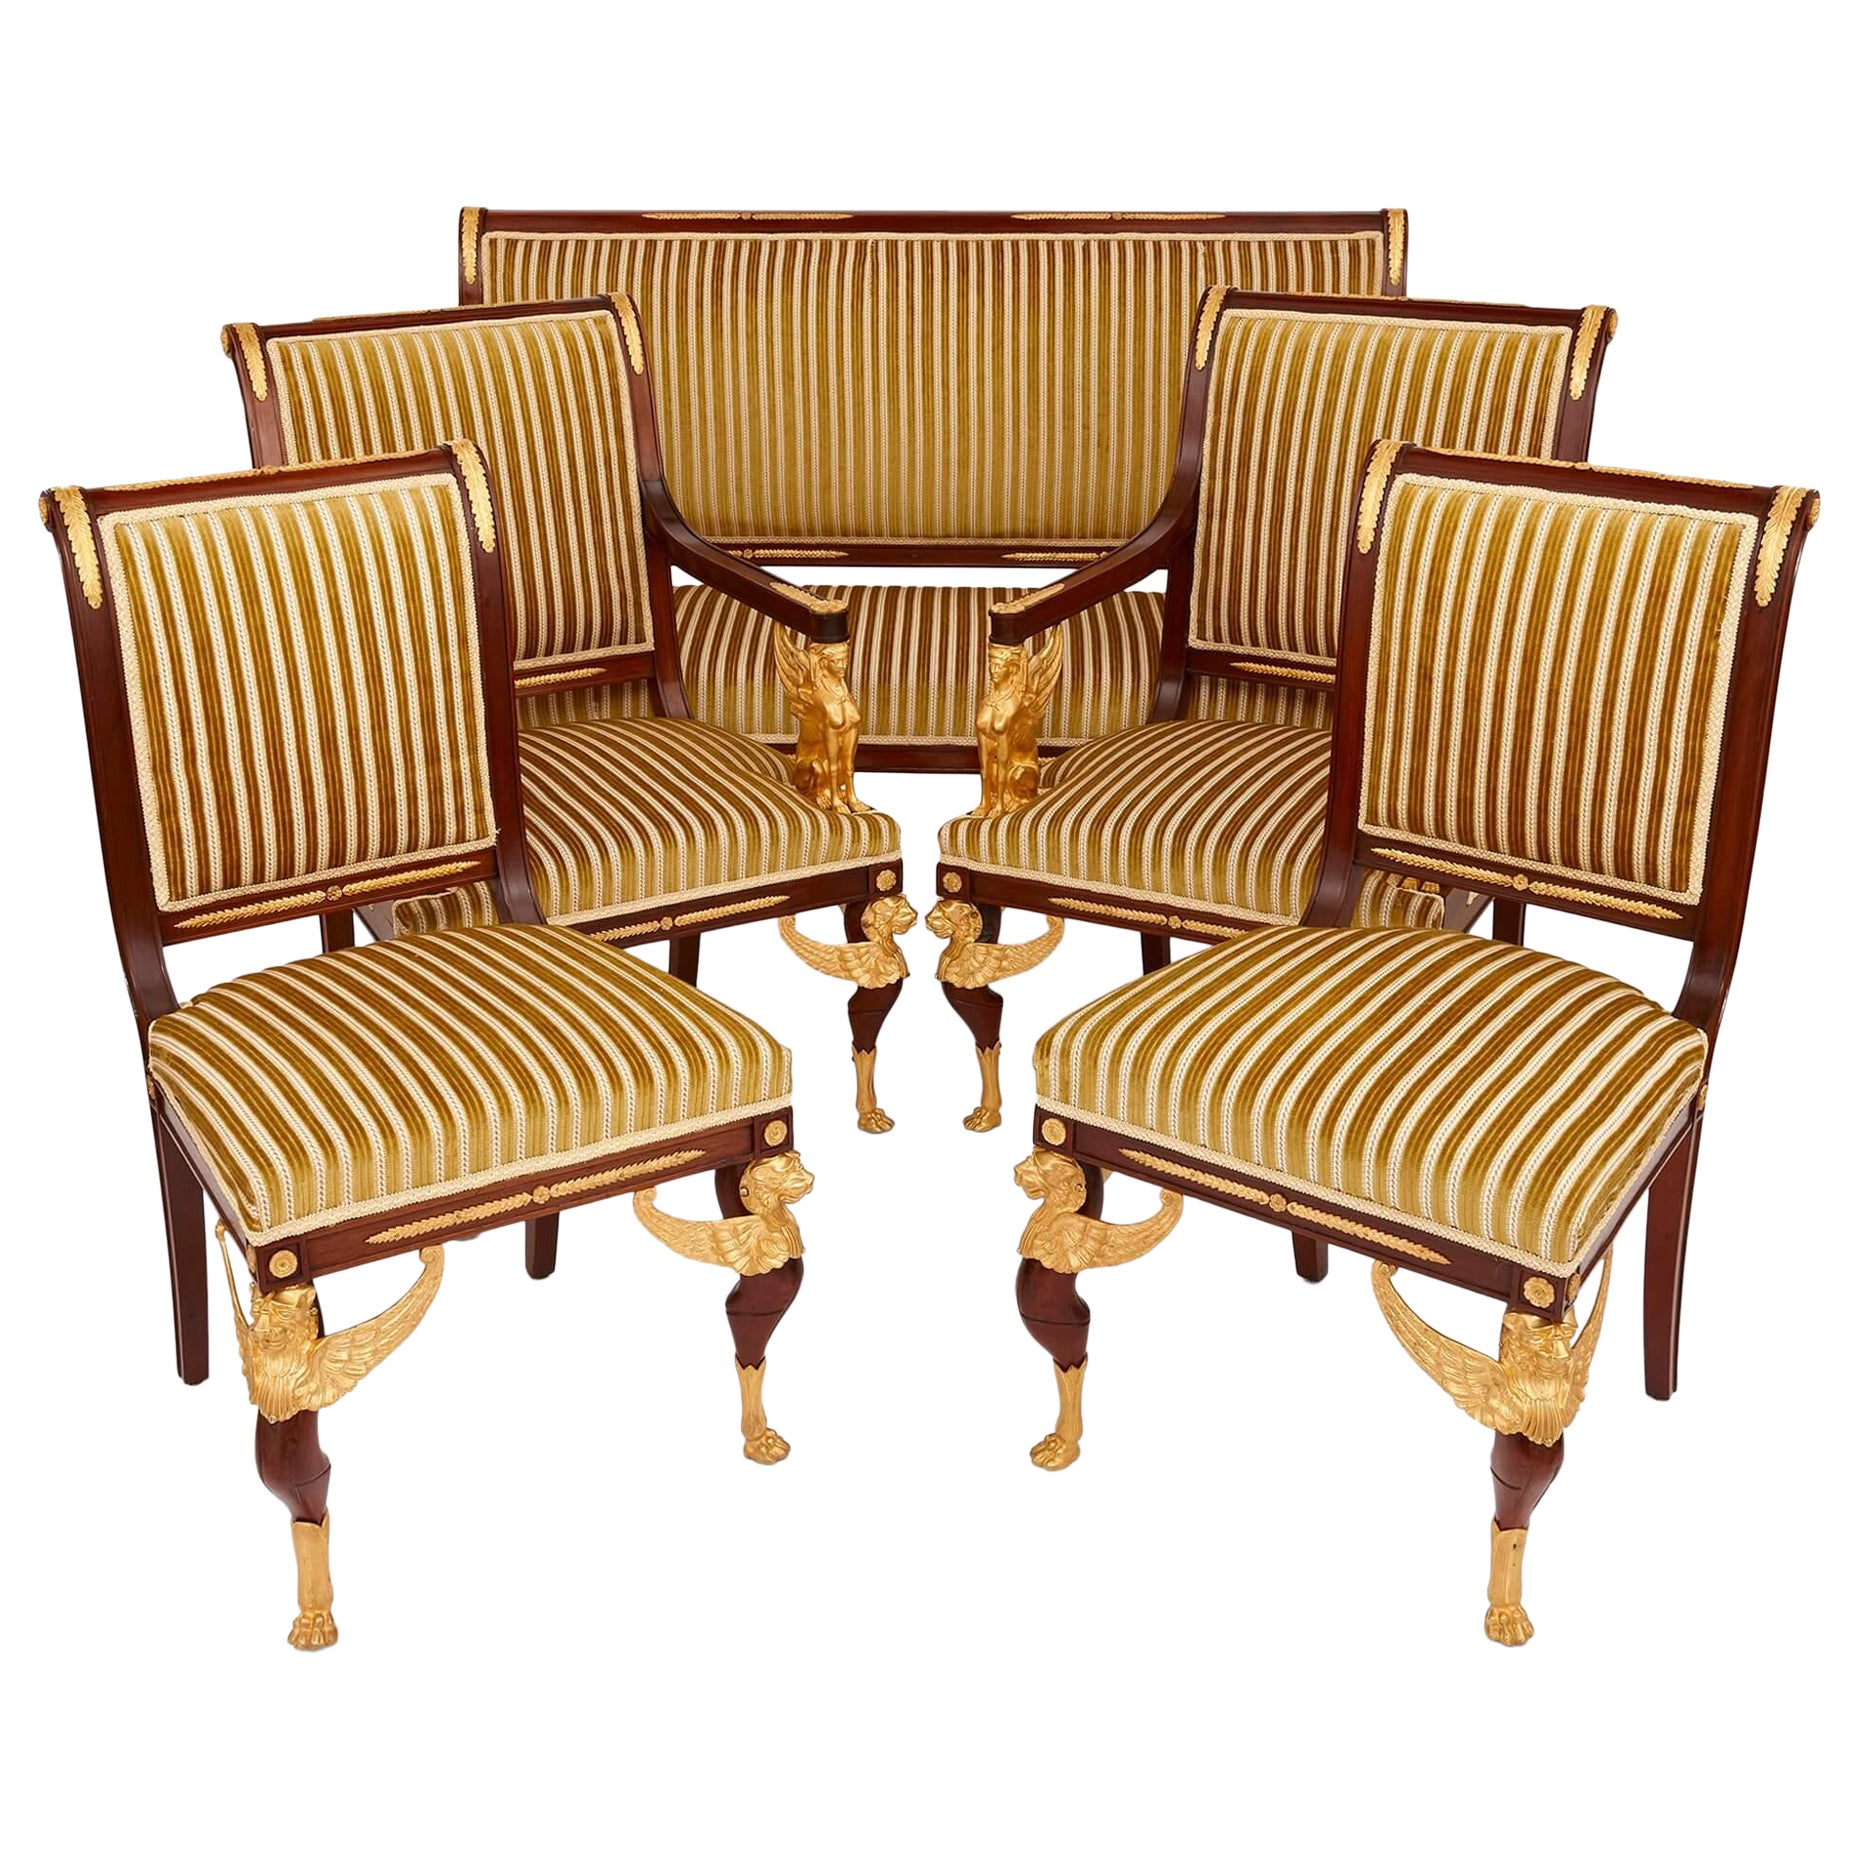 French Empire Style Gilt-Bronze and Mahogany Five-Piece Salon Suite